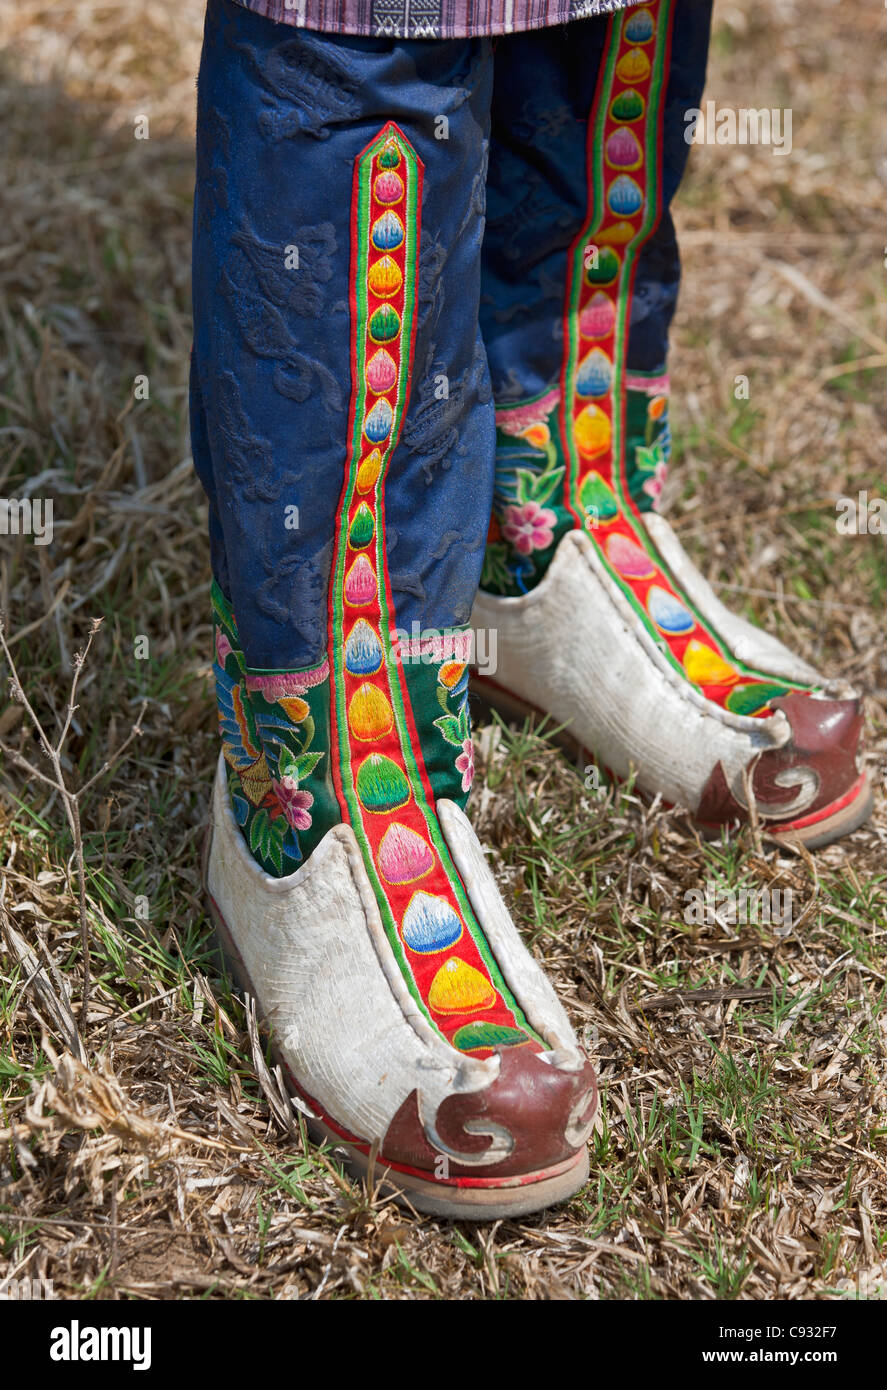 Tsholham, traditional knee-length boots that are worn by Bhutanese men during important ceremonial occasions. Stock Photo